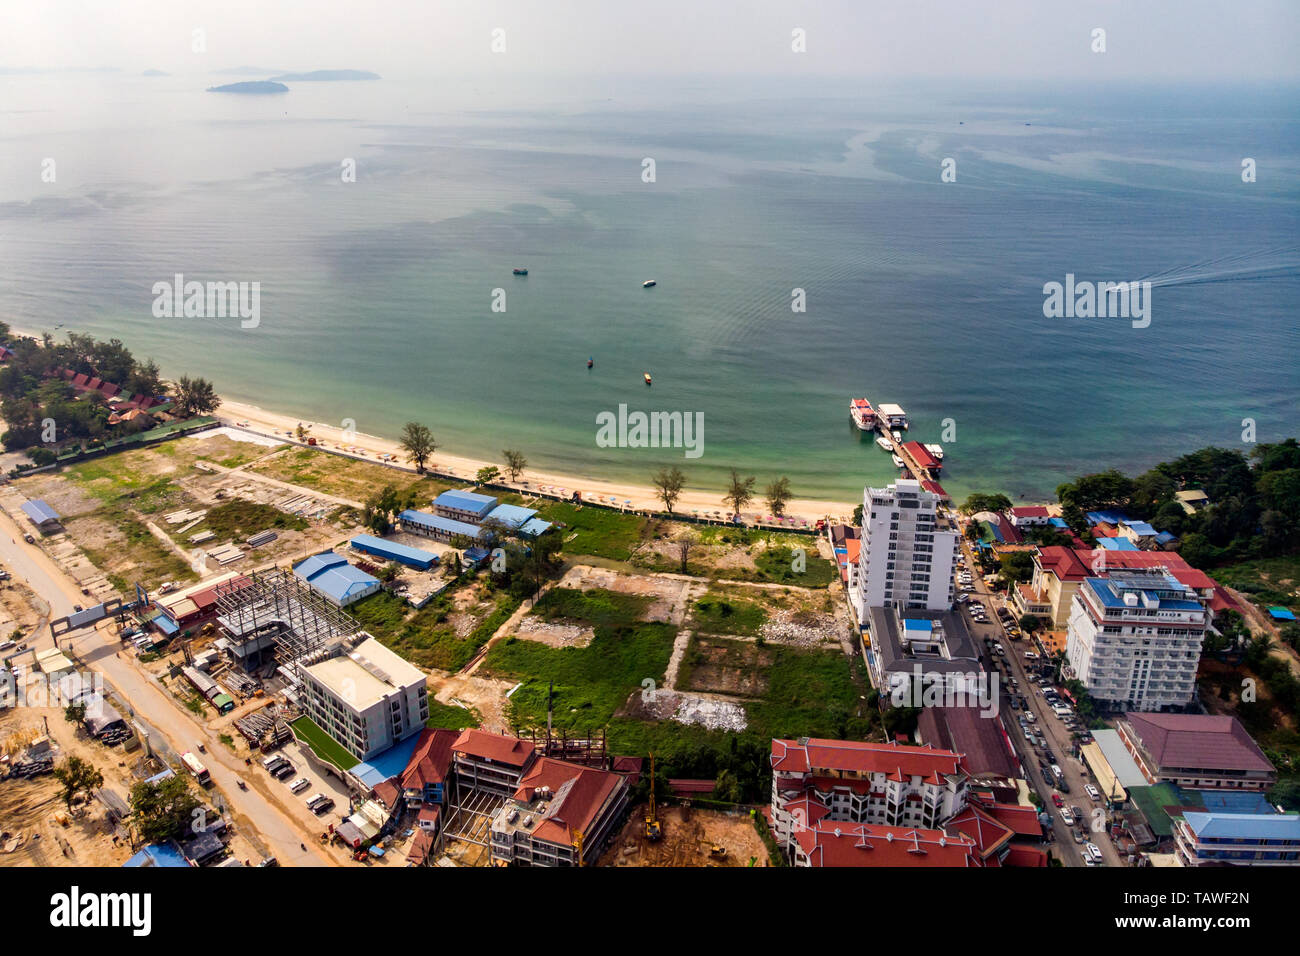 Top view of the wasteland by the sea and buildings under construction in Sihanoukville, Cambodia Stock Photo